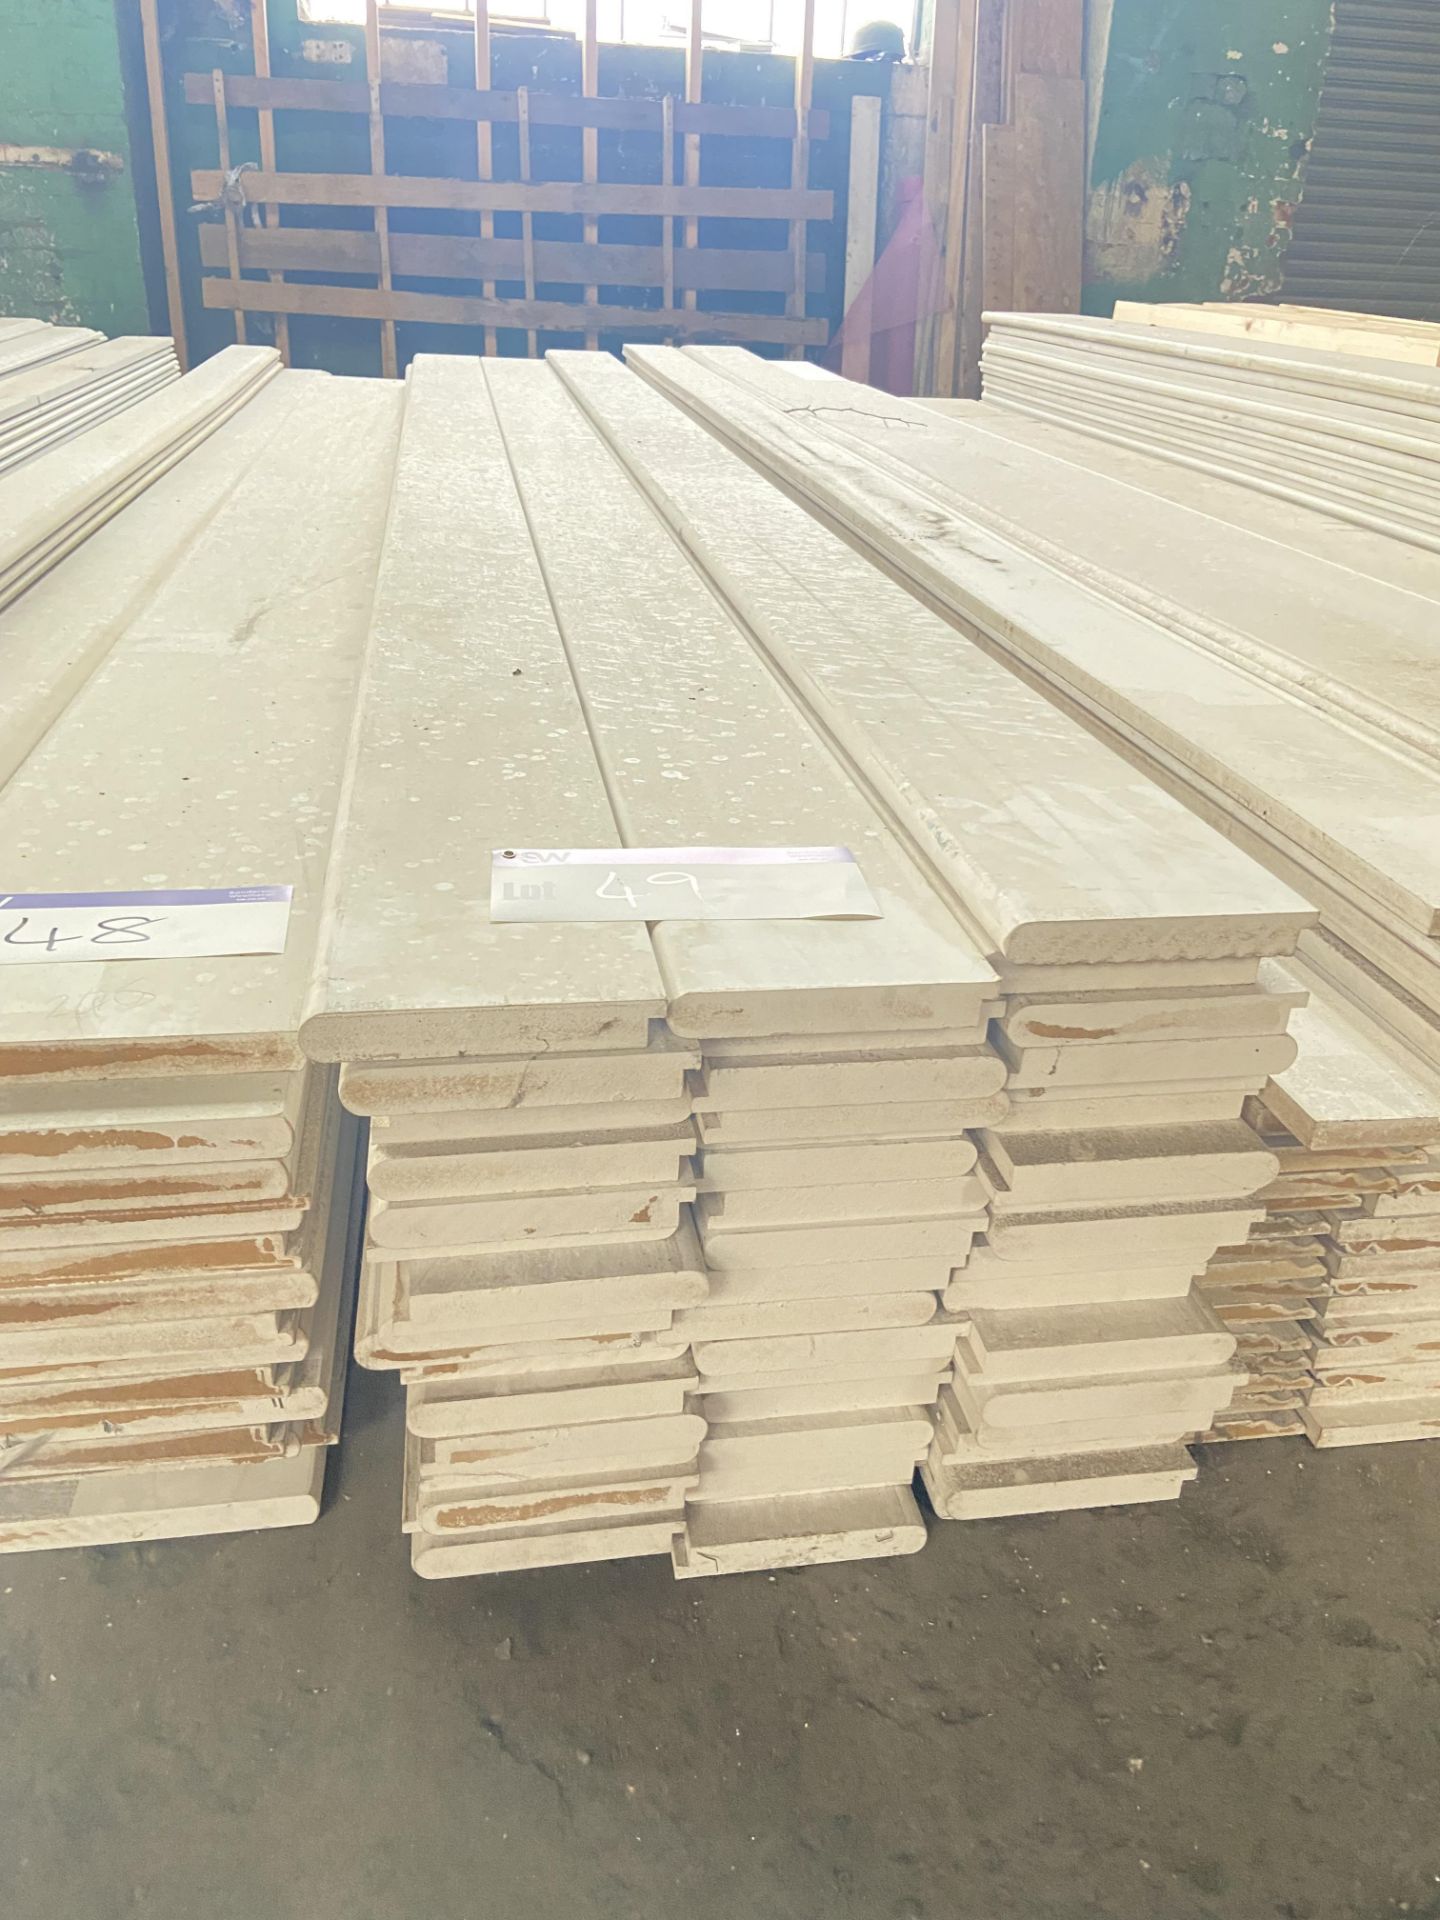 Approx. 58 Lengths of MDF Primed Bull Nose Window Boards, each approx. 170mm x 22mm x 3.65m long, as